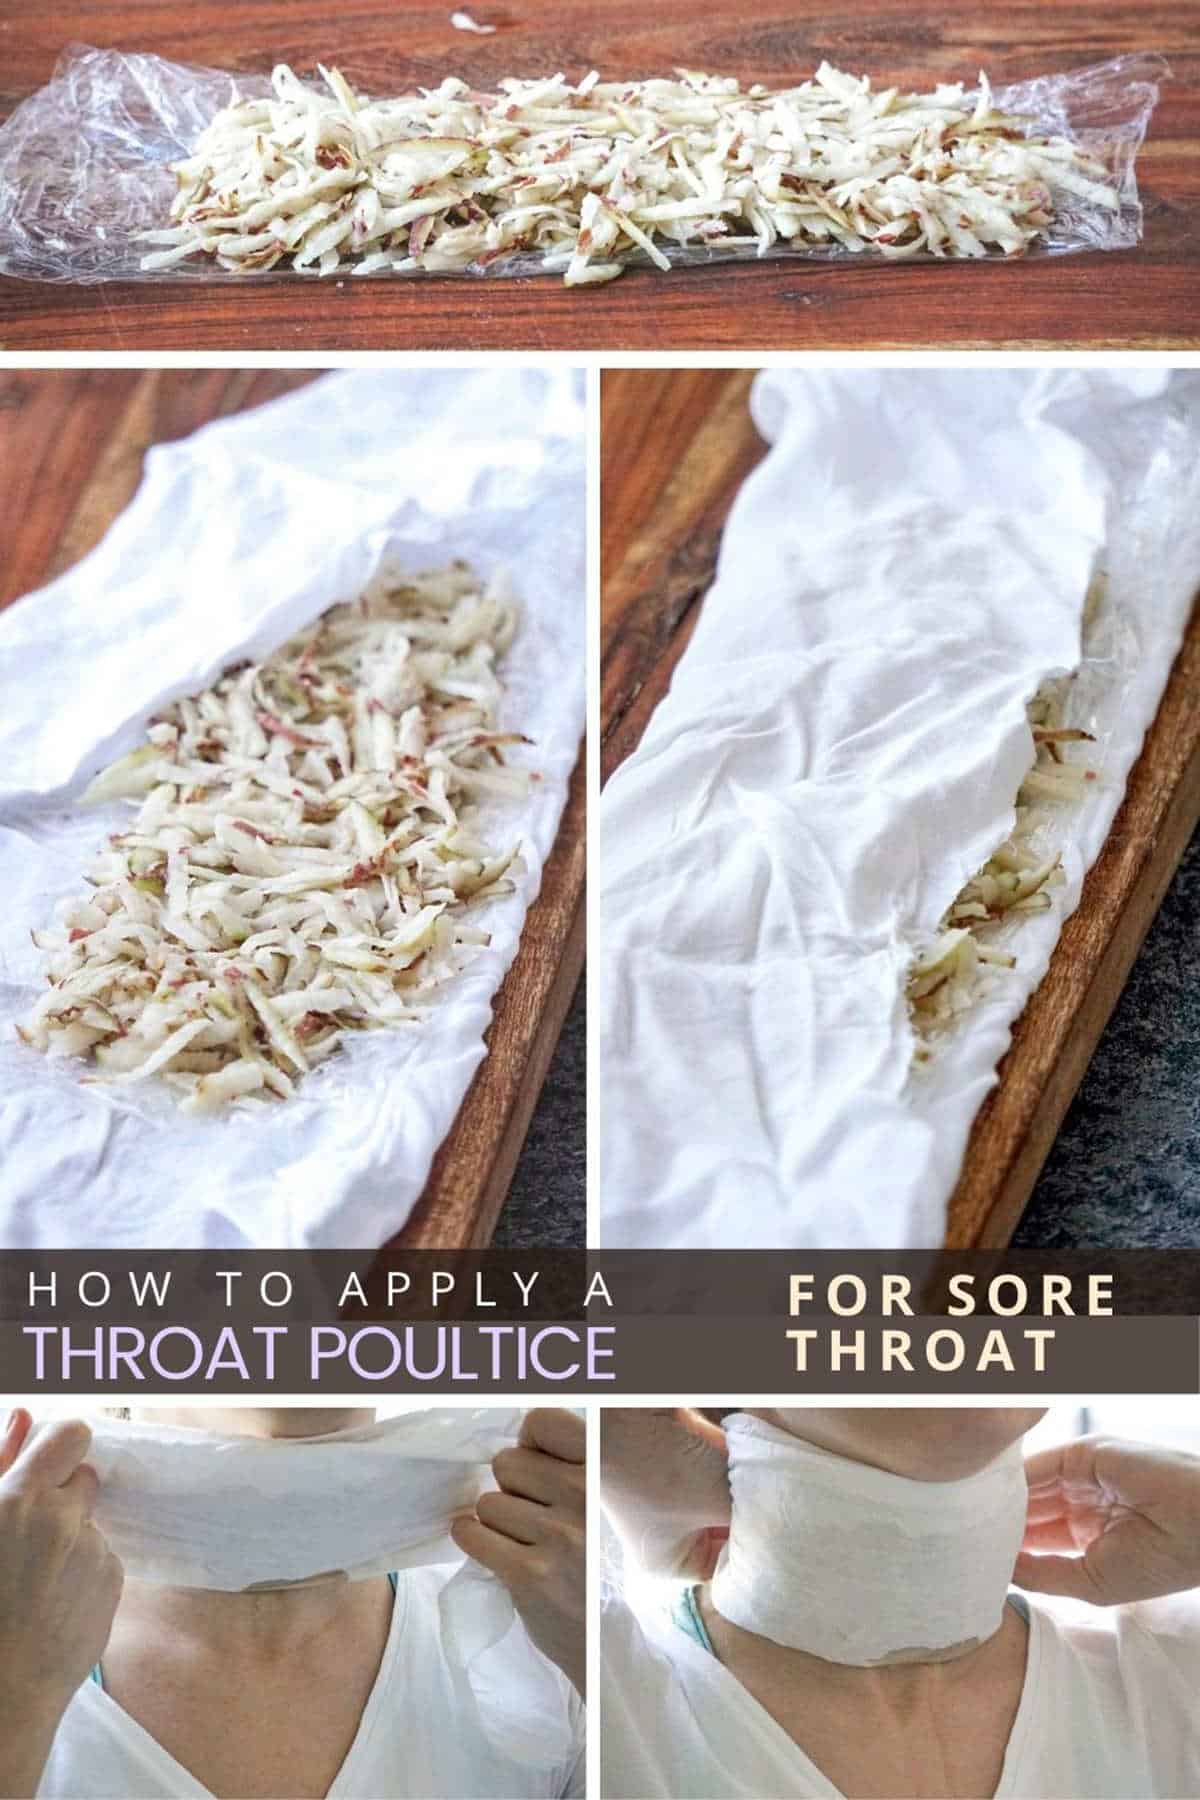 Sore throat natural remedies: potato poultice to relieve sore throat at home. A natural remedy that actually works for adults and kids as well!